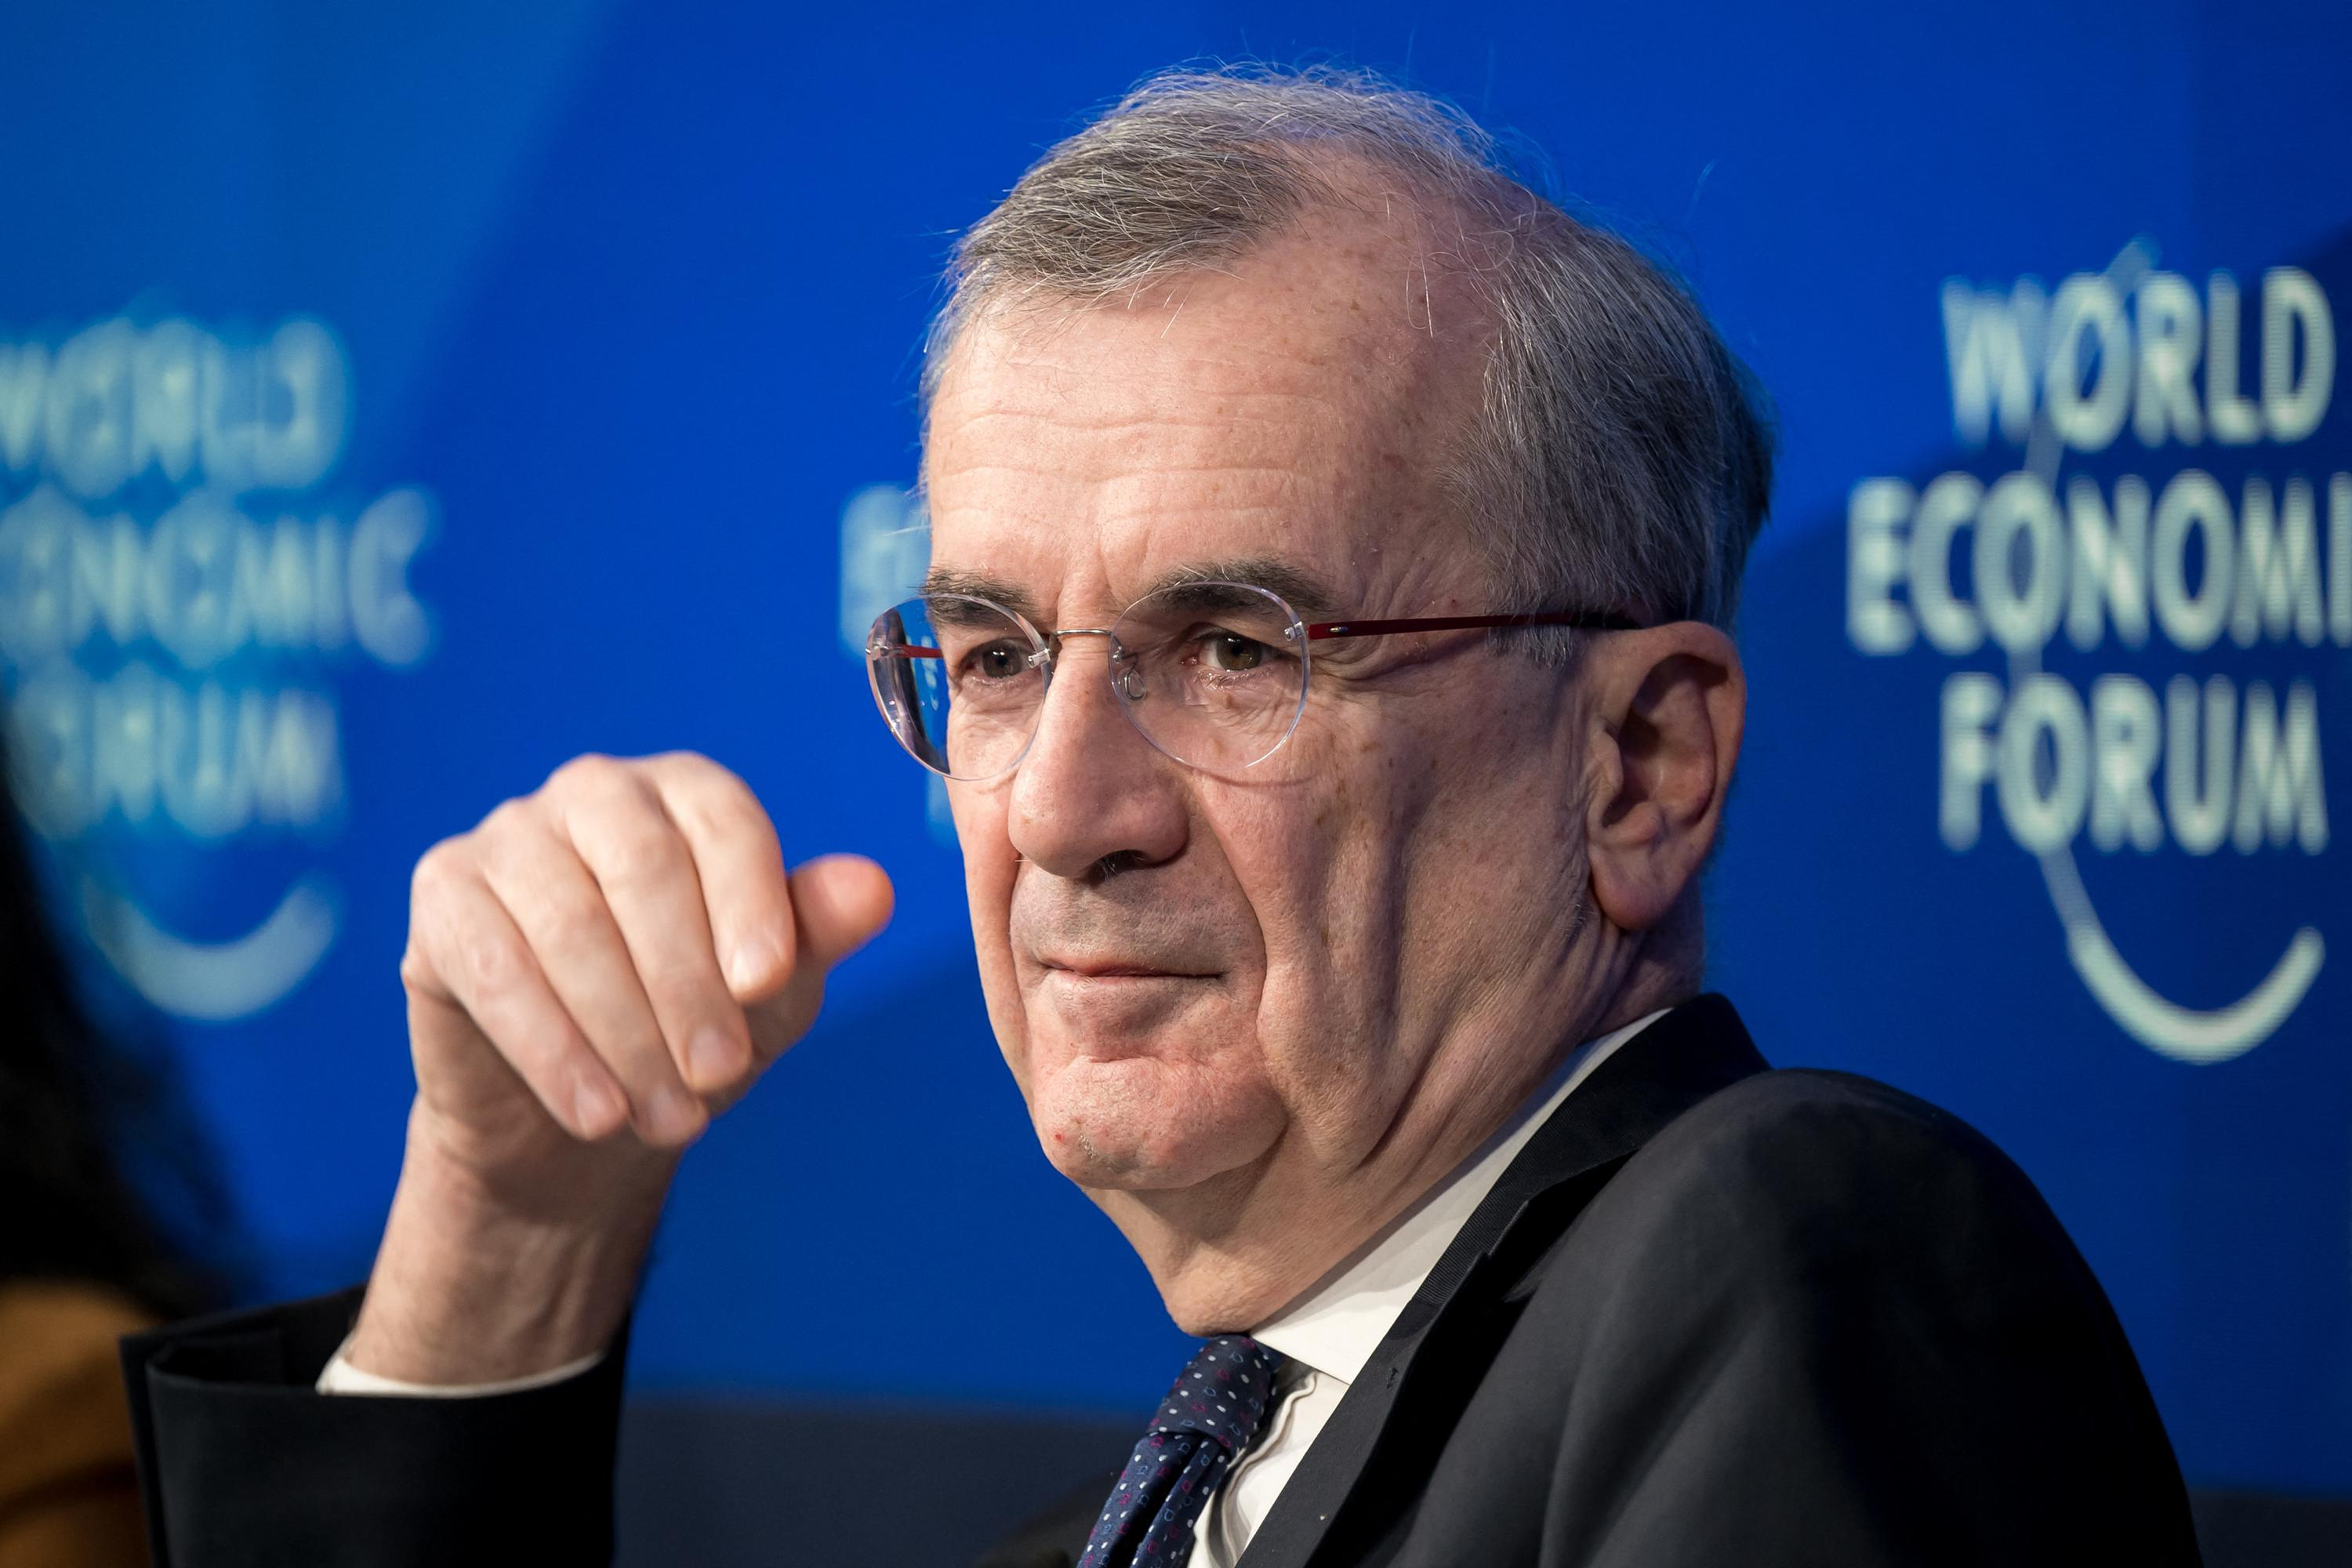 “Unless there are any surprises”, the ECB’s first rate cut should take place on June 6, estimates Villeroy de Galhau